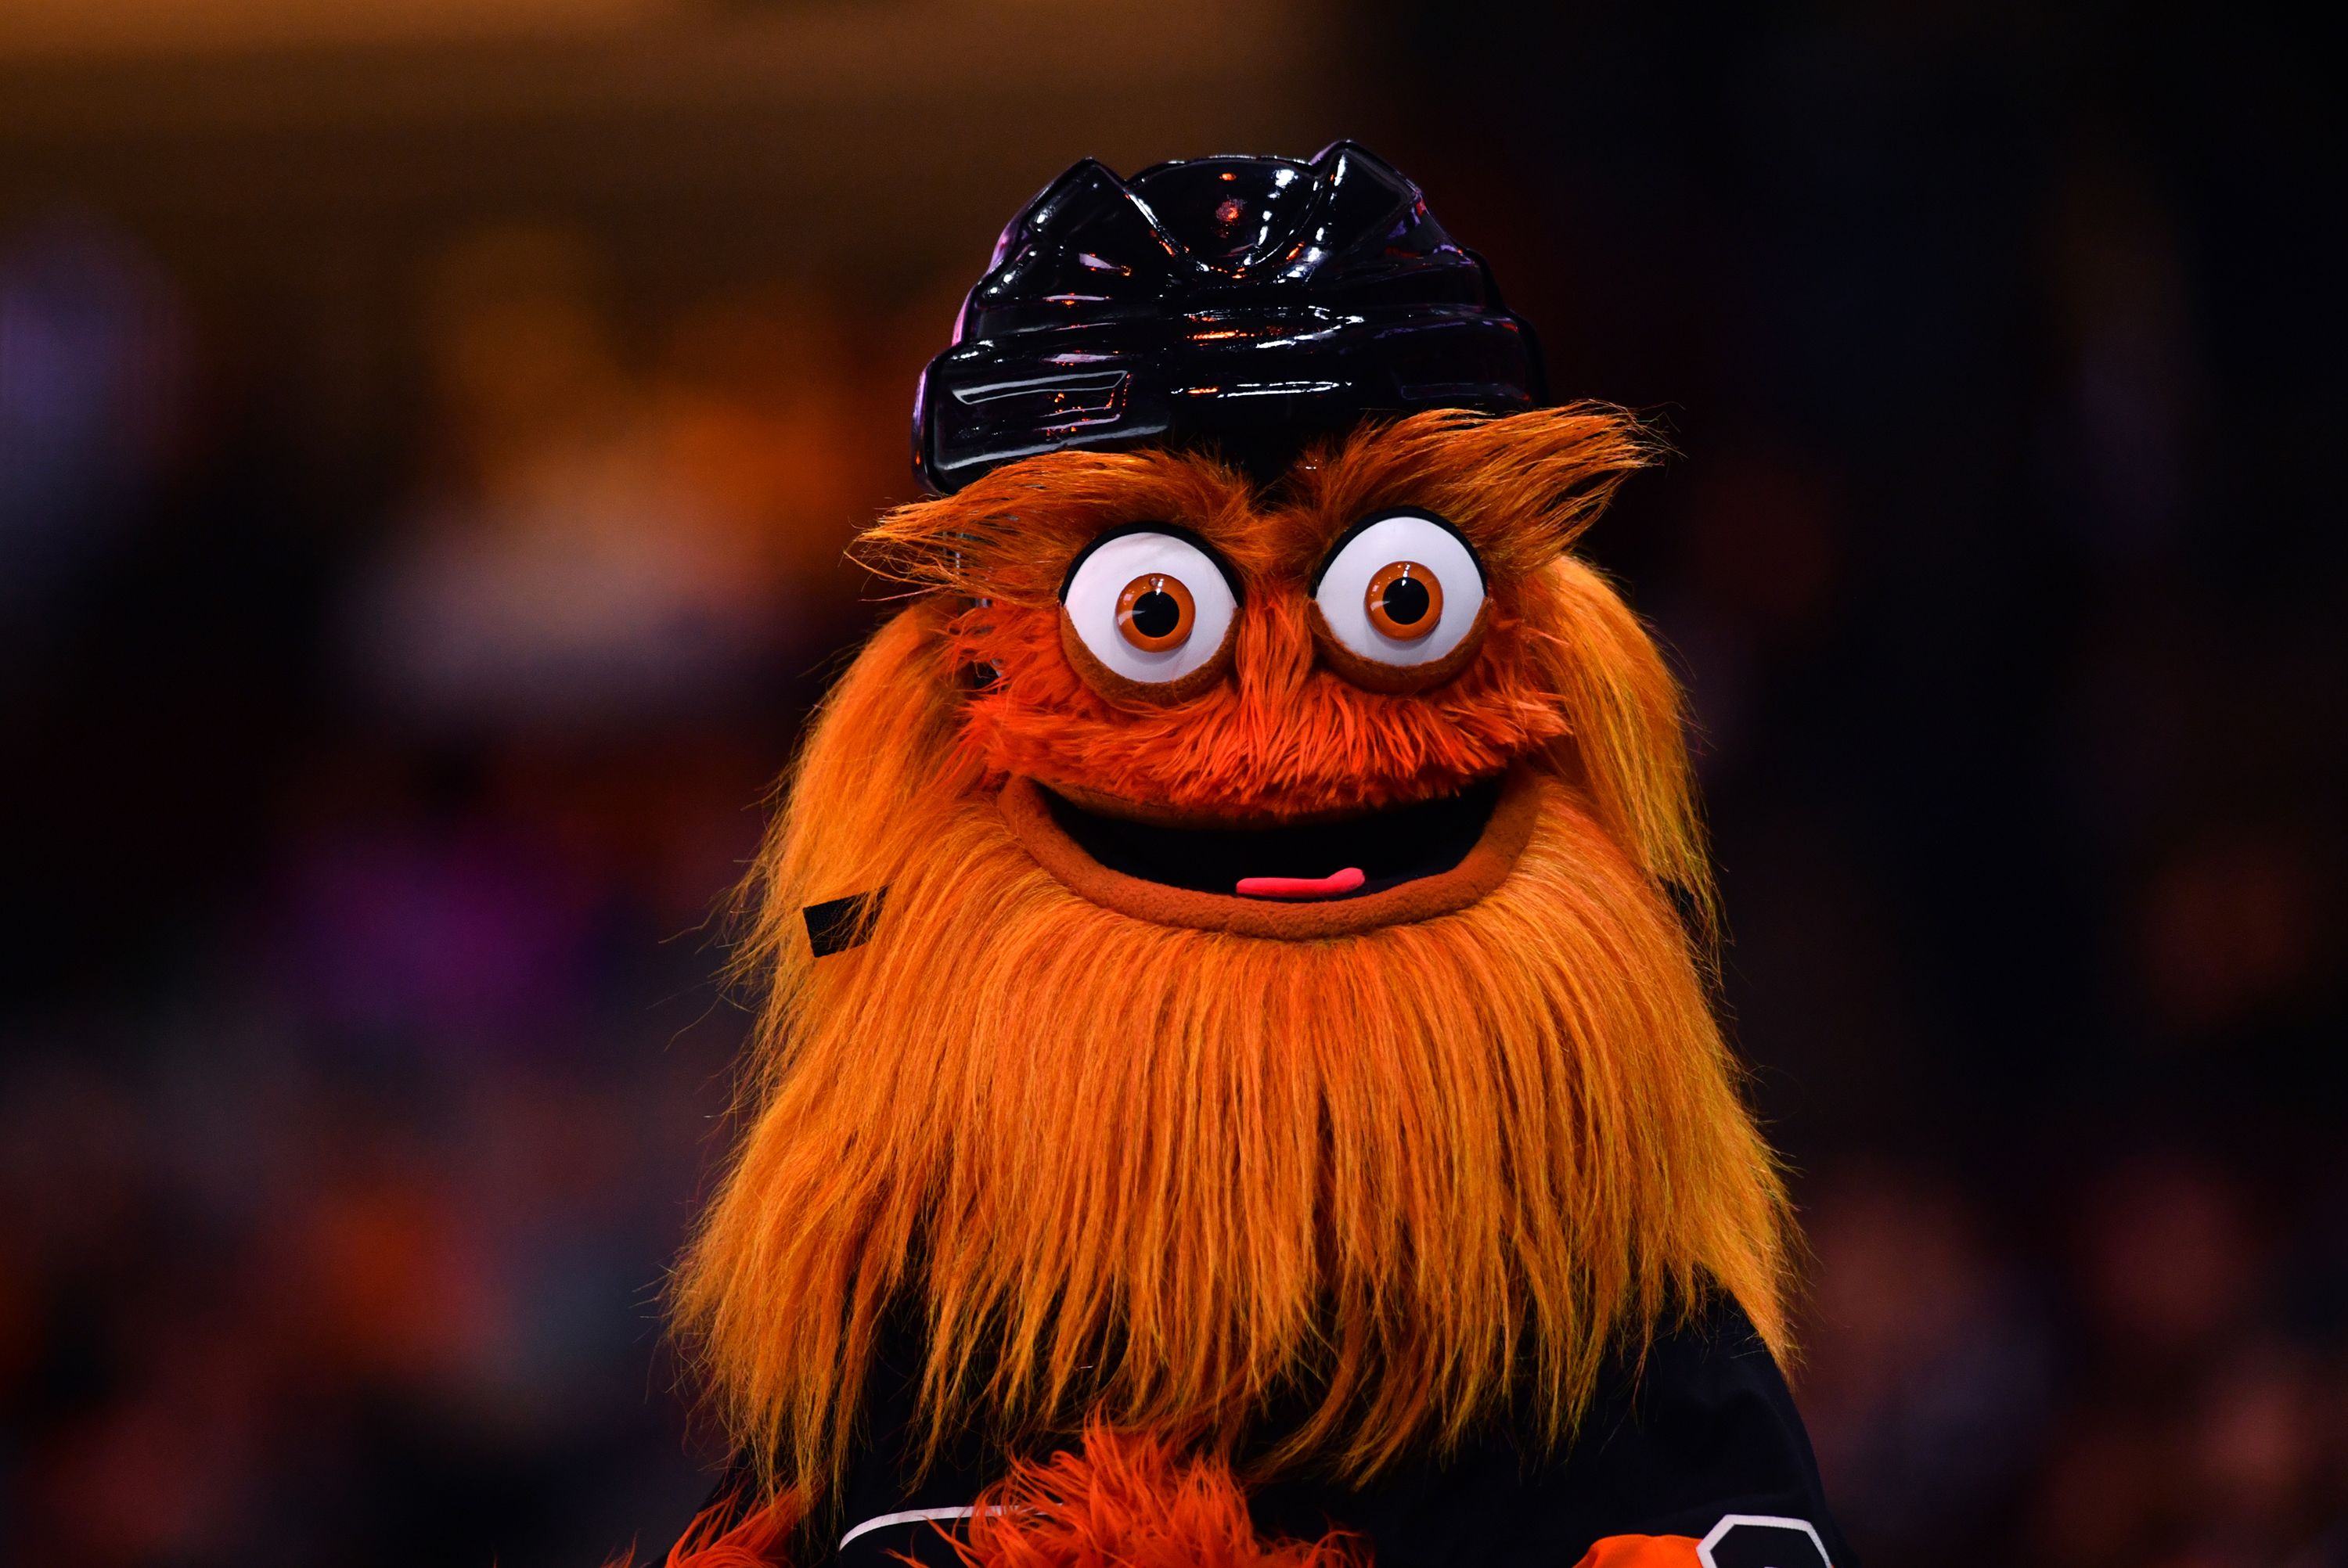 Philadelphia Flyers mascot 'Gritty' accused of punching boy